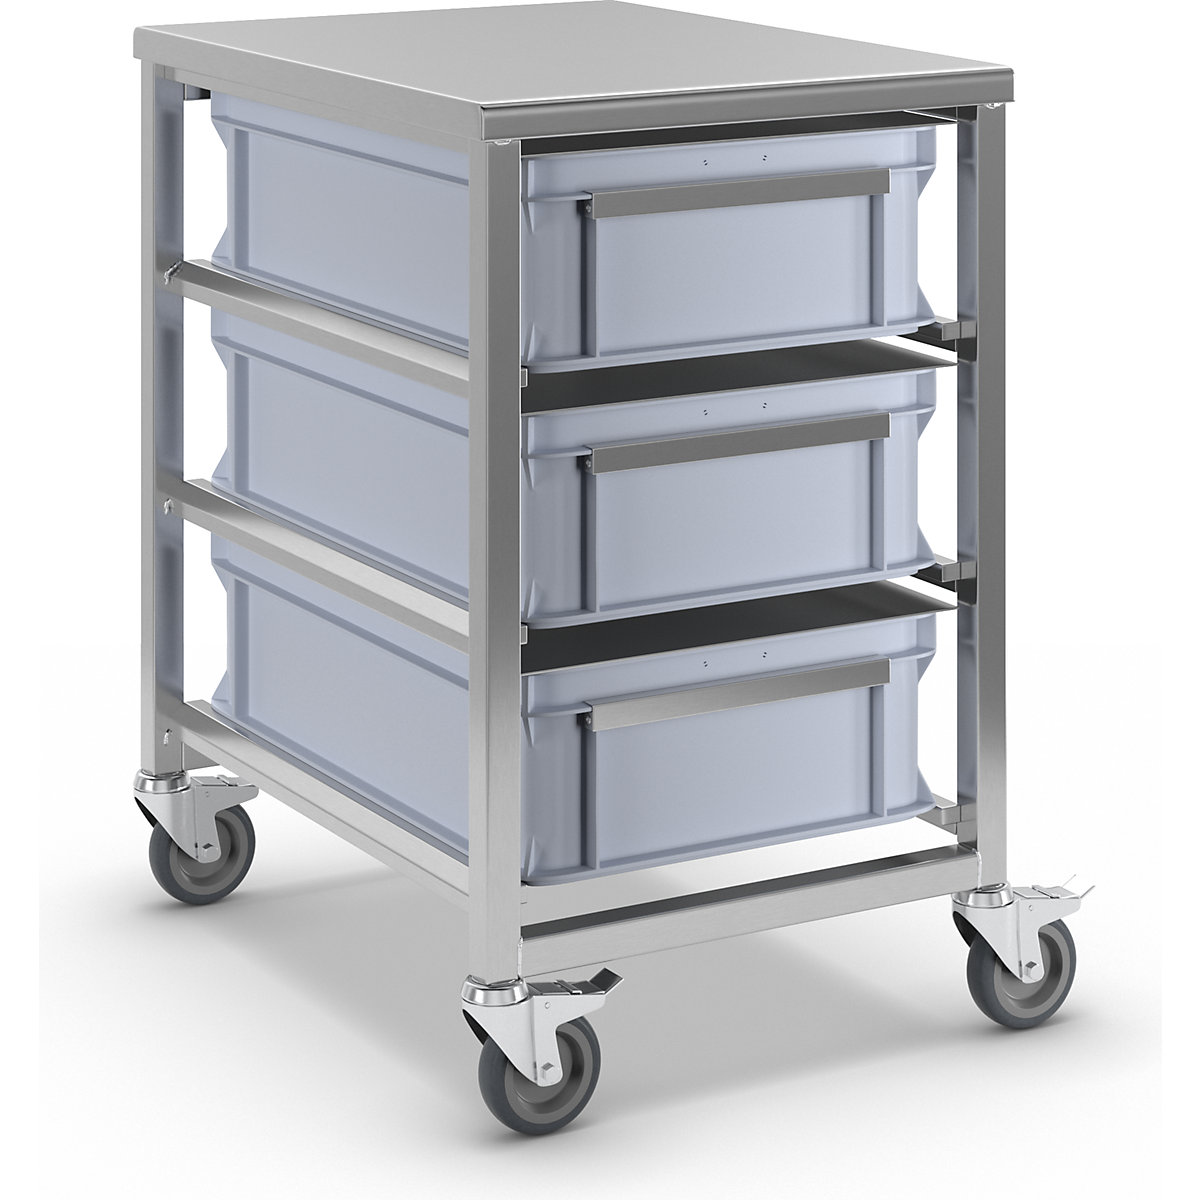 Stainless steel container trolley